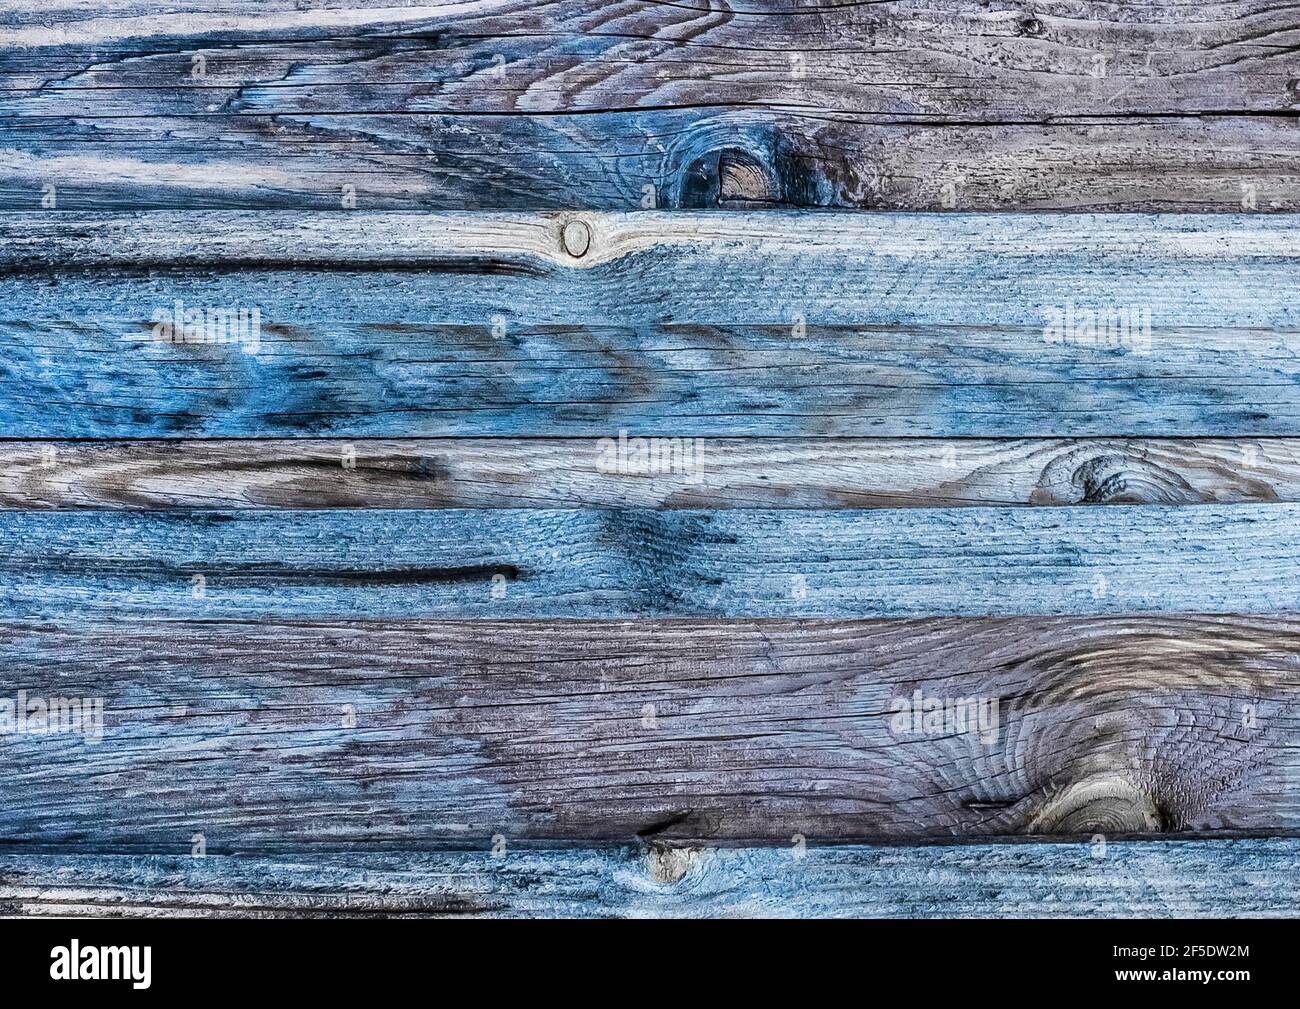 Dark gray texture of an old wooden fence with blue paint, abstract plank background. Stock Photo